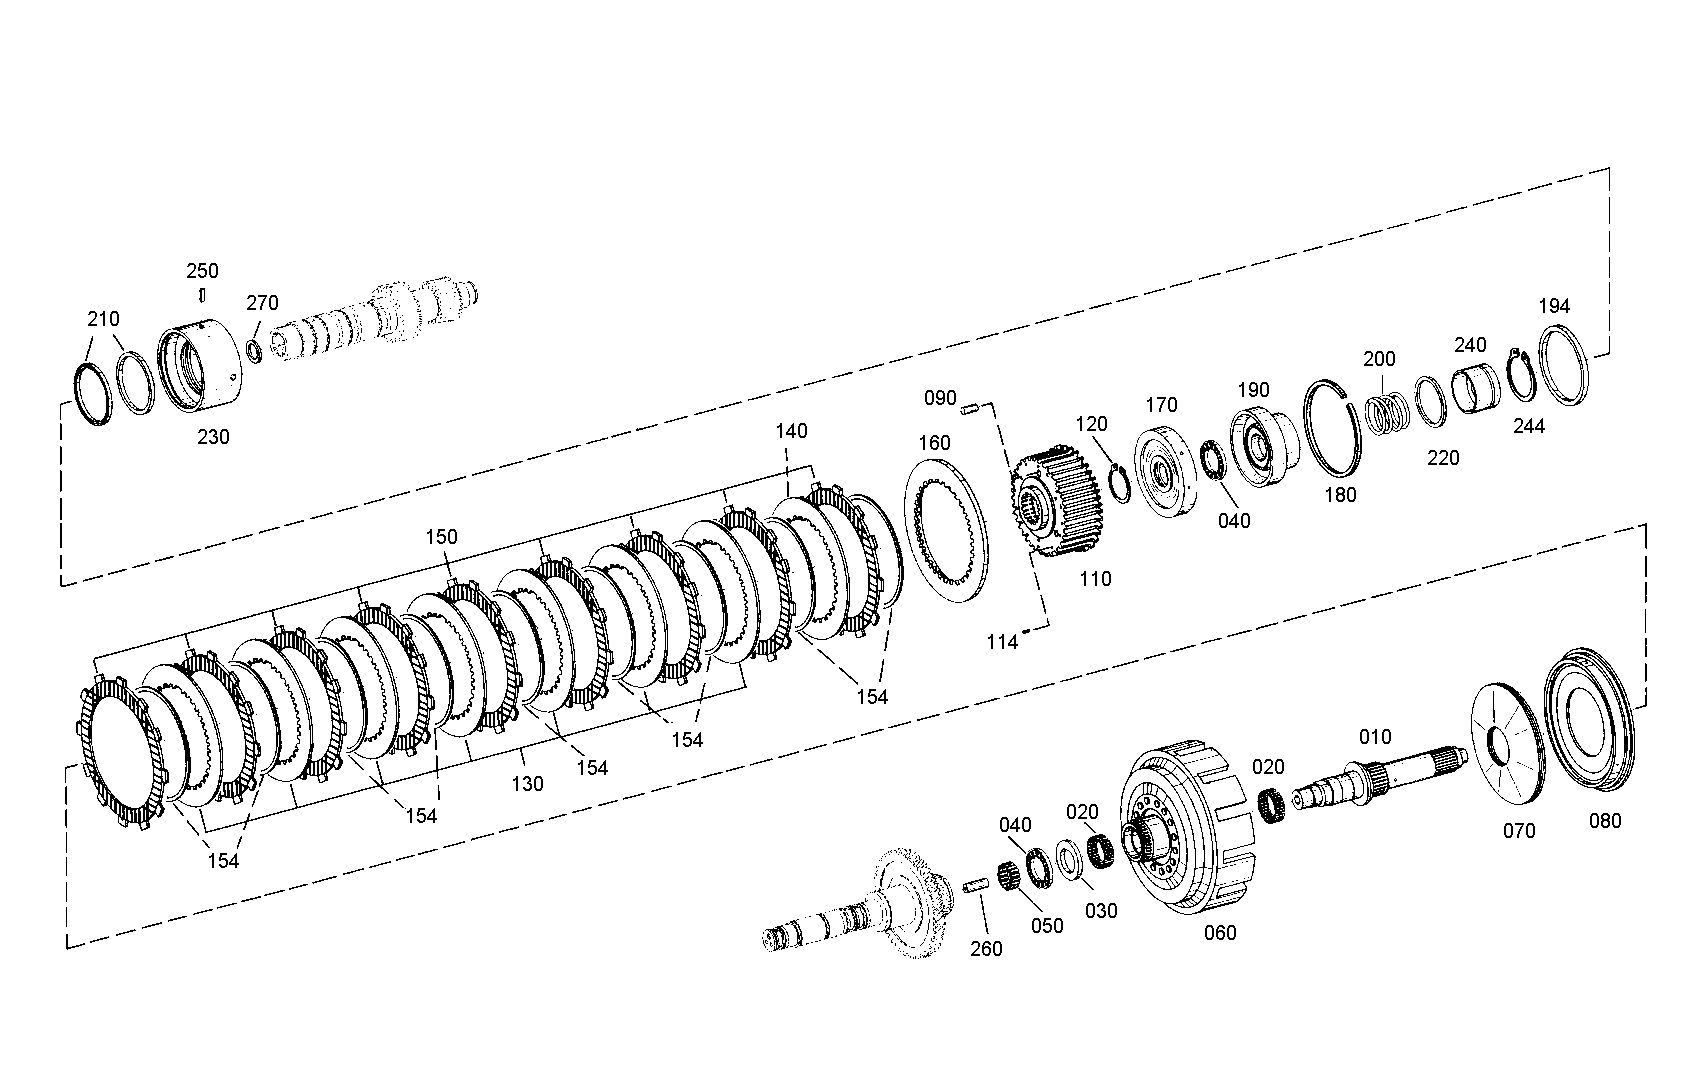 drawing for AGCO F824100100120 - SET OF SPRINGS (figure 1)